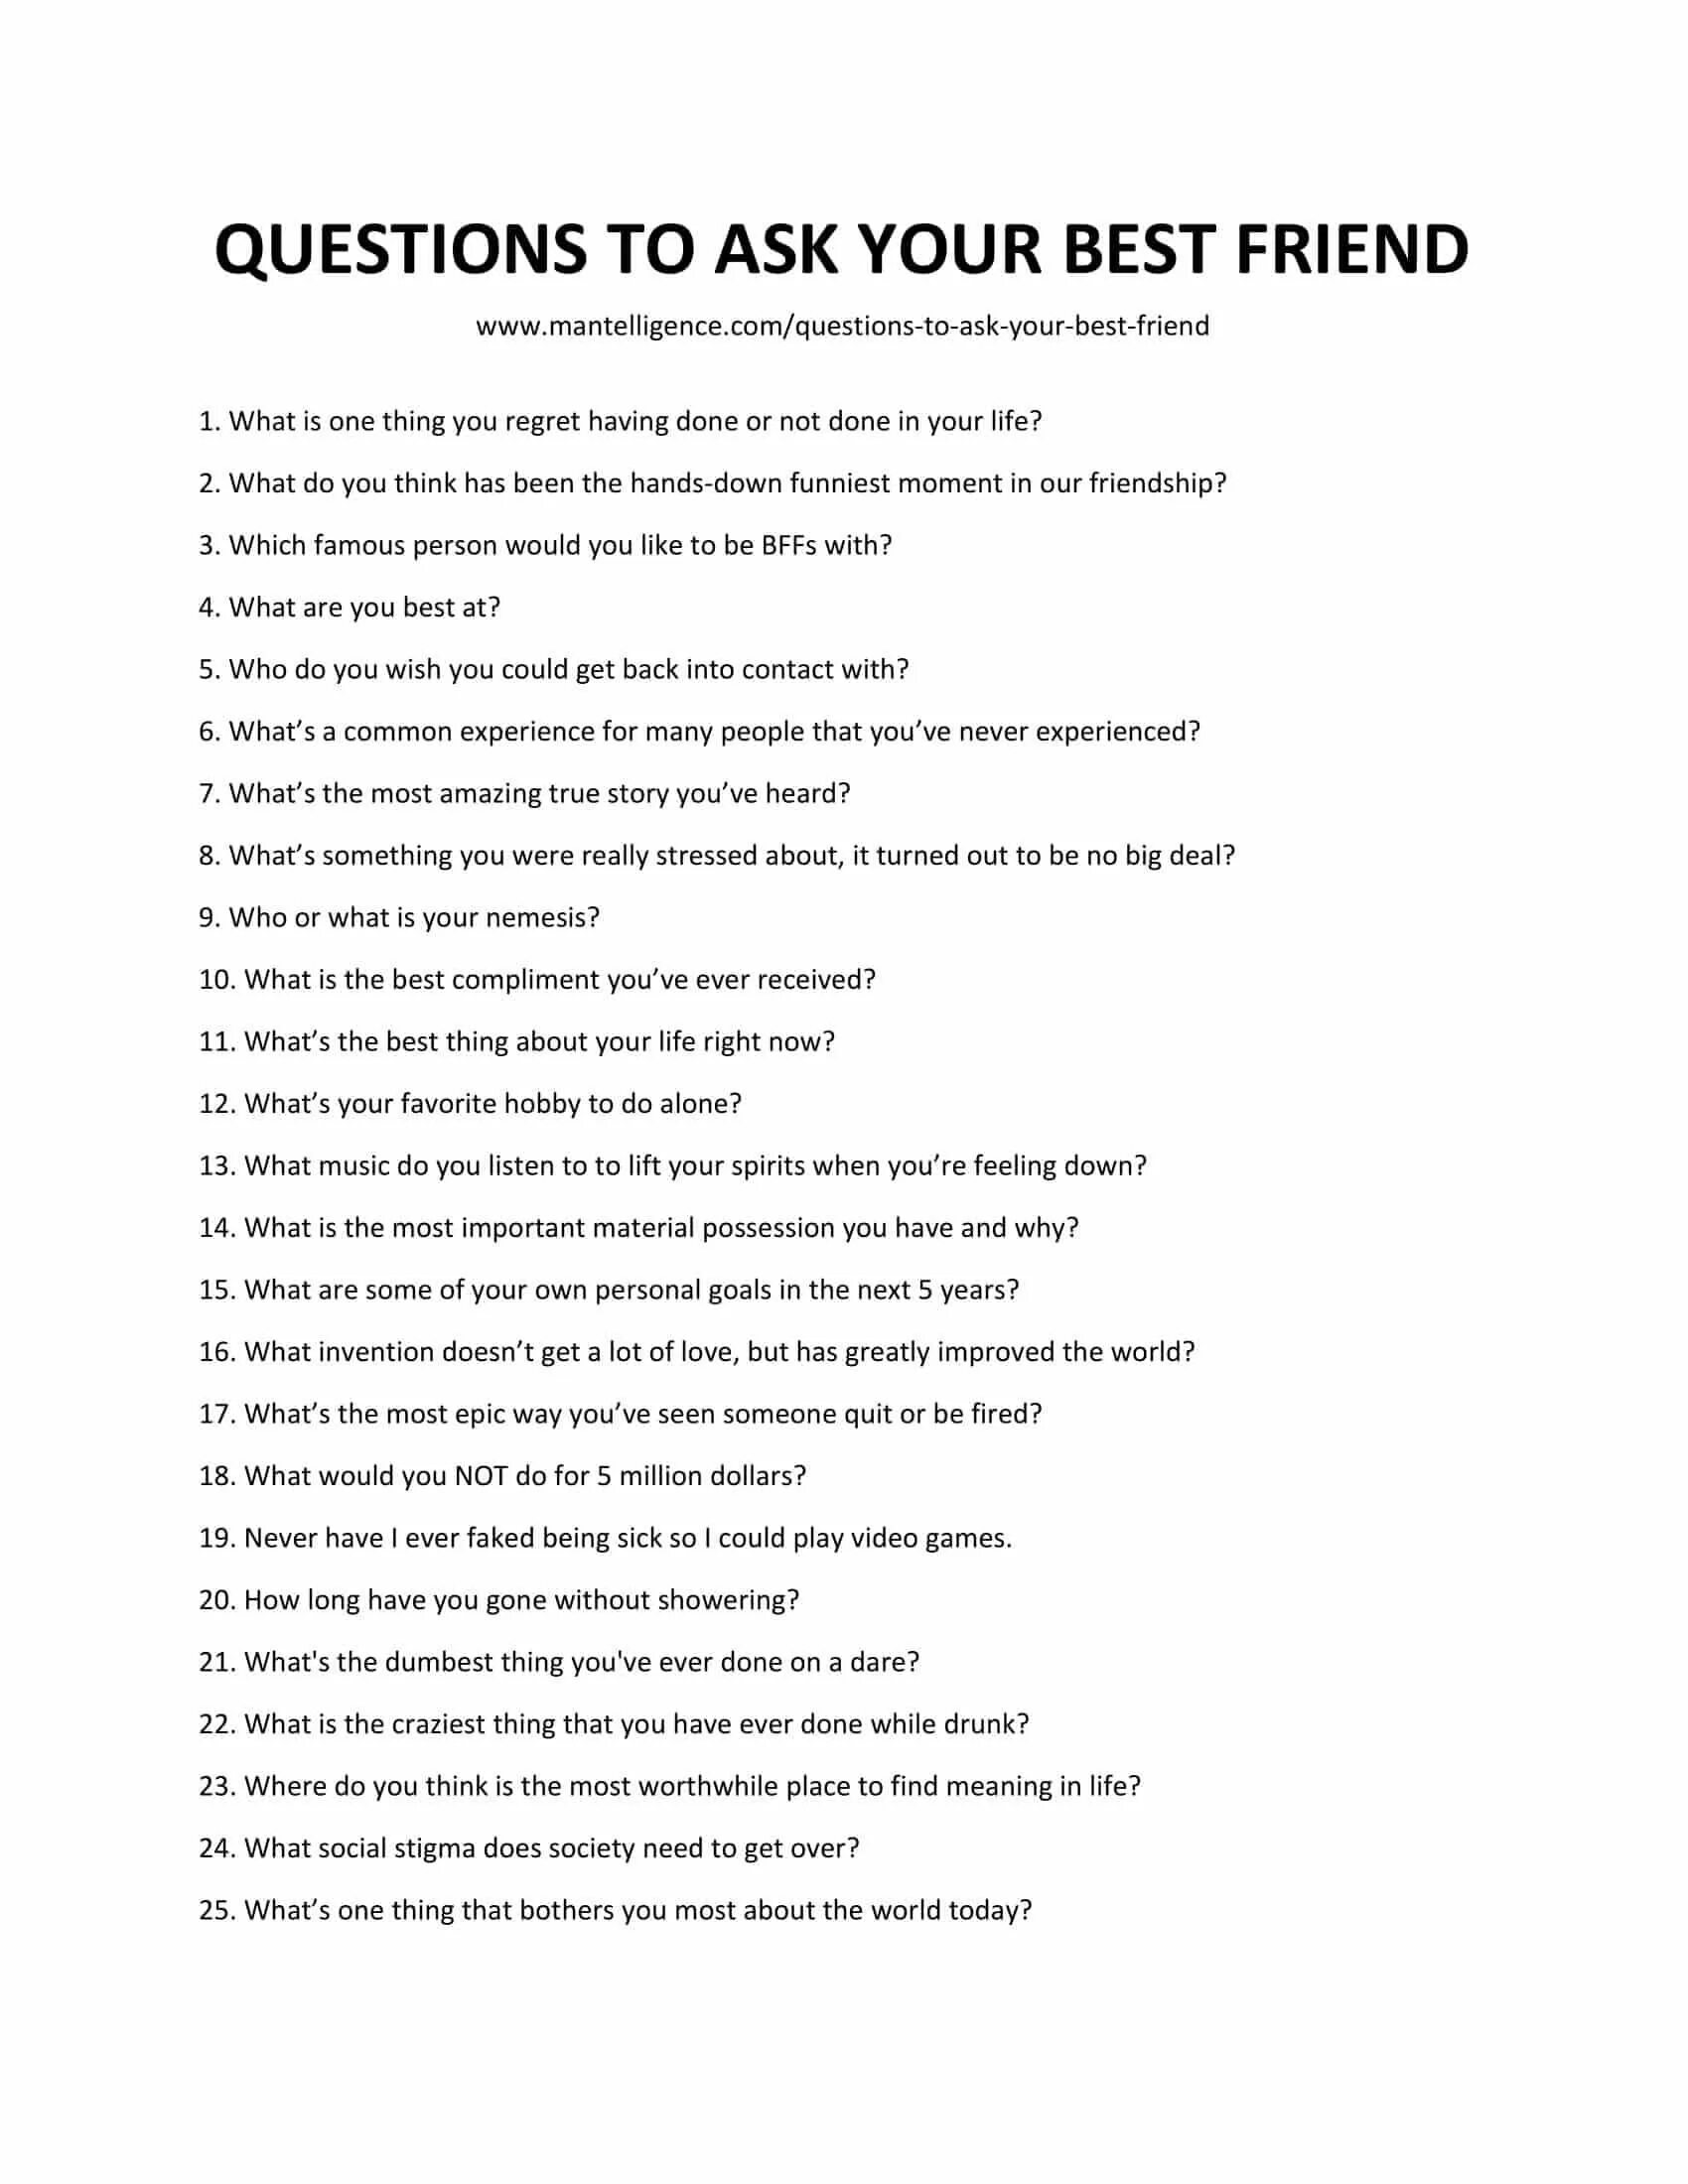 100 Questions to ask. Questions for dating. List Truth or Dare questions. [ Вопросы | questions ]. Any other questions